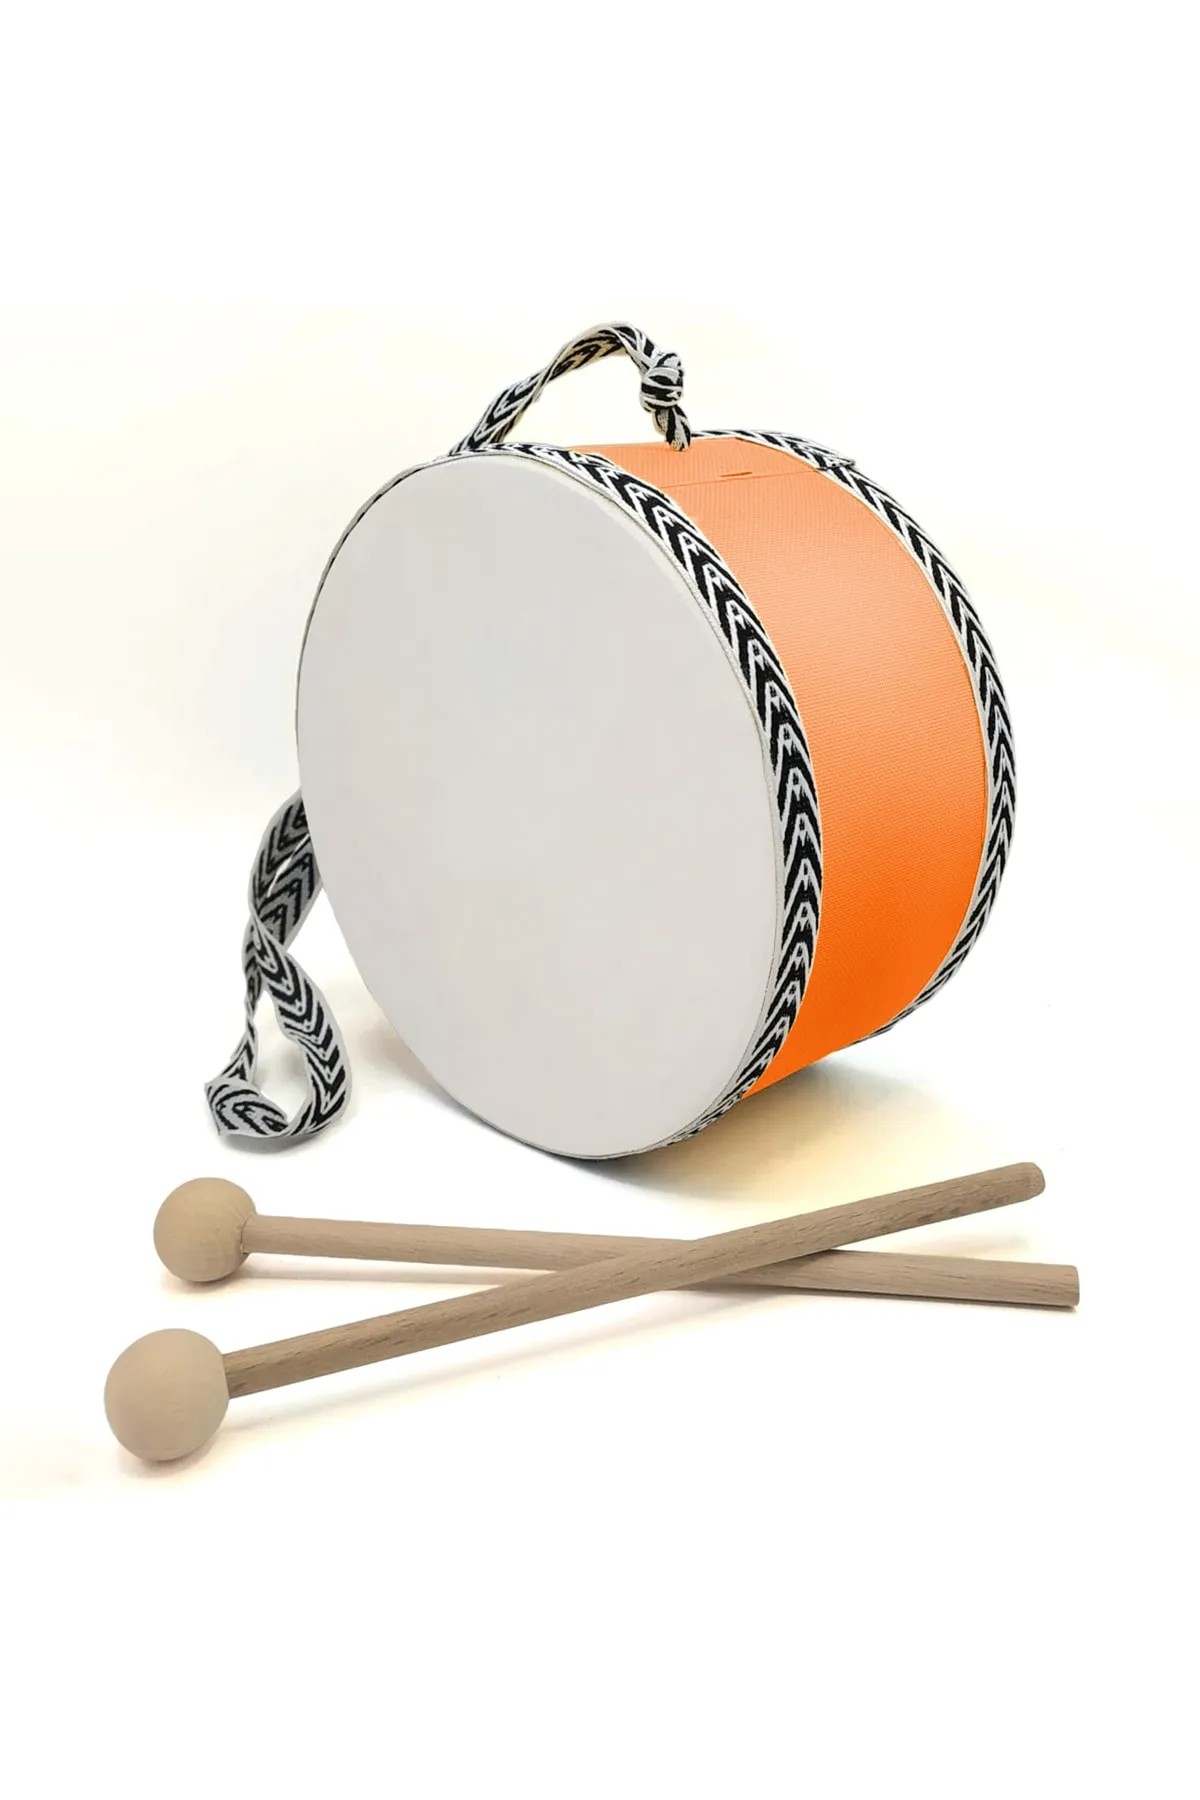 Real Leather | Toy Children's Drum | Handmade Gift